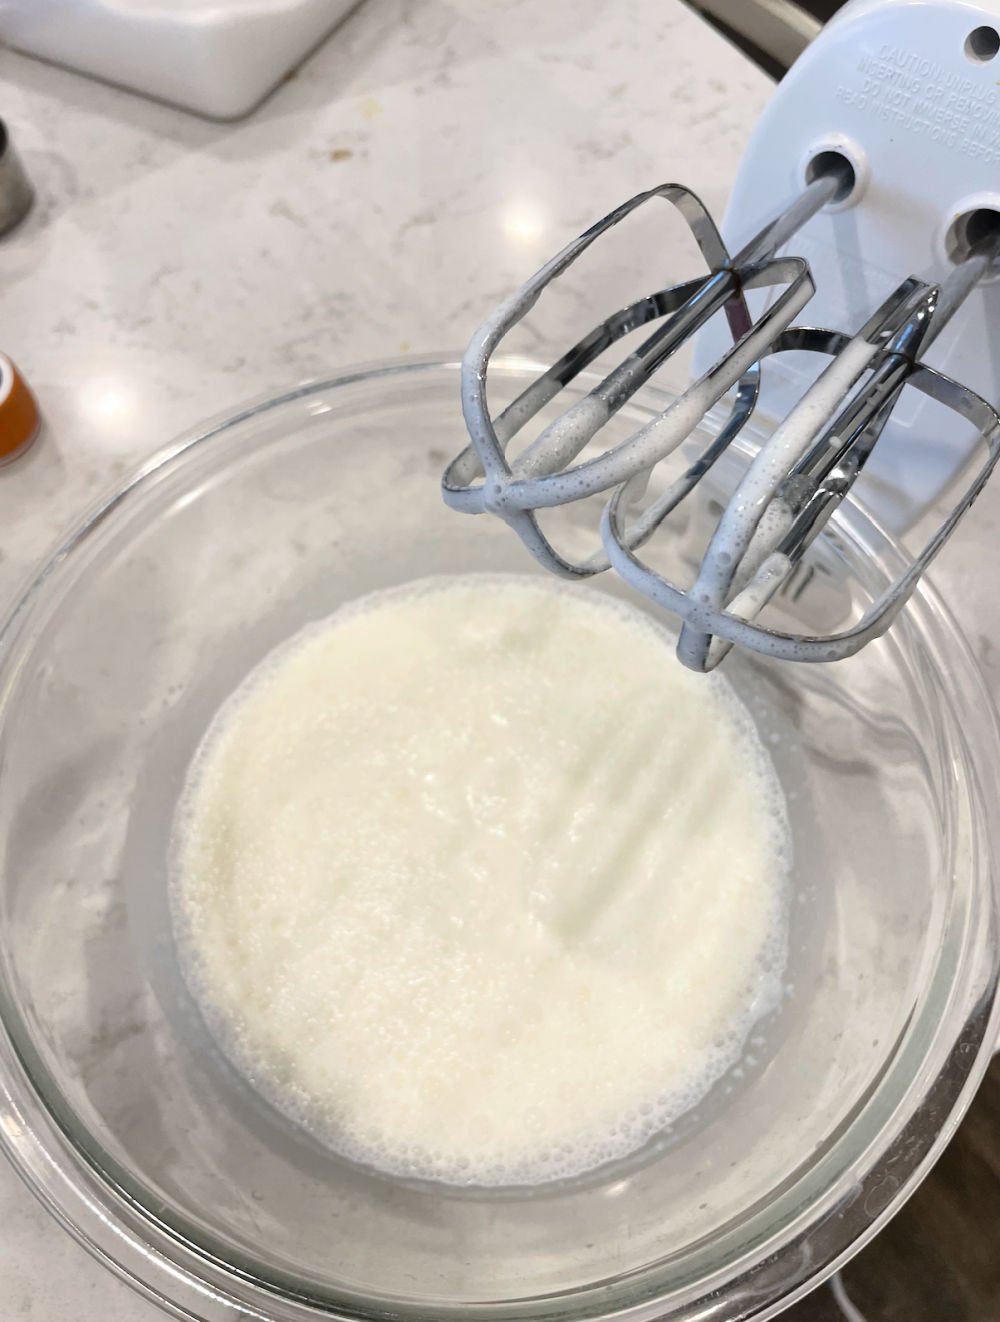 Whipped cream in a mixing bowl with hand mixer